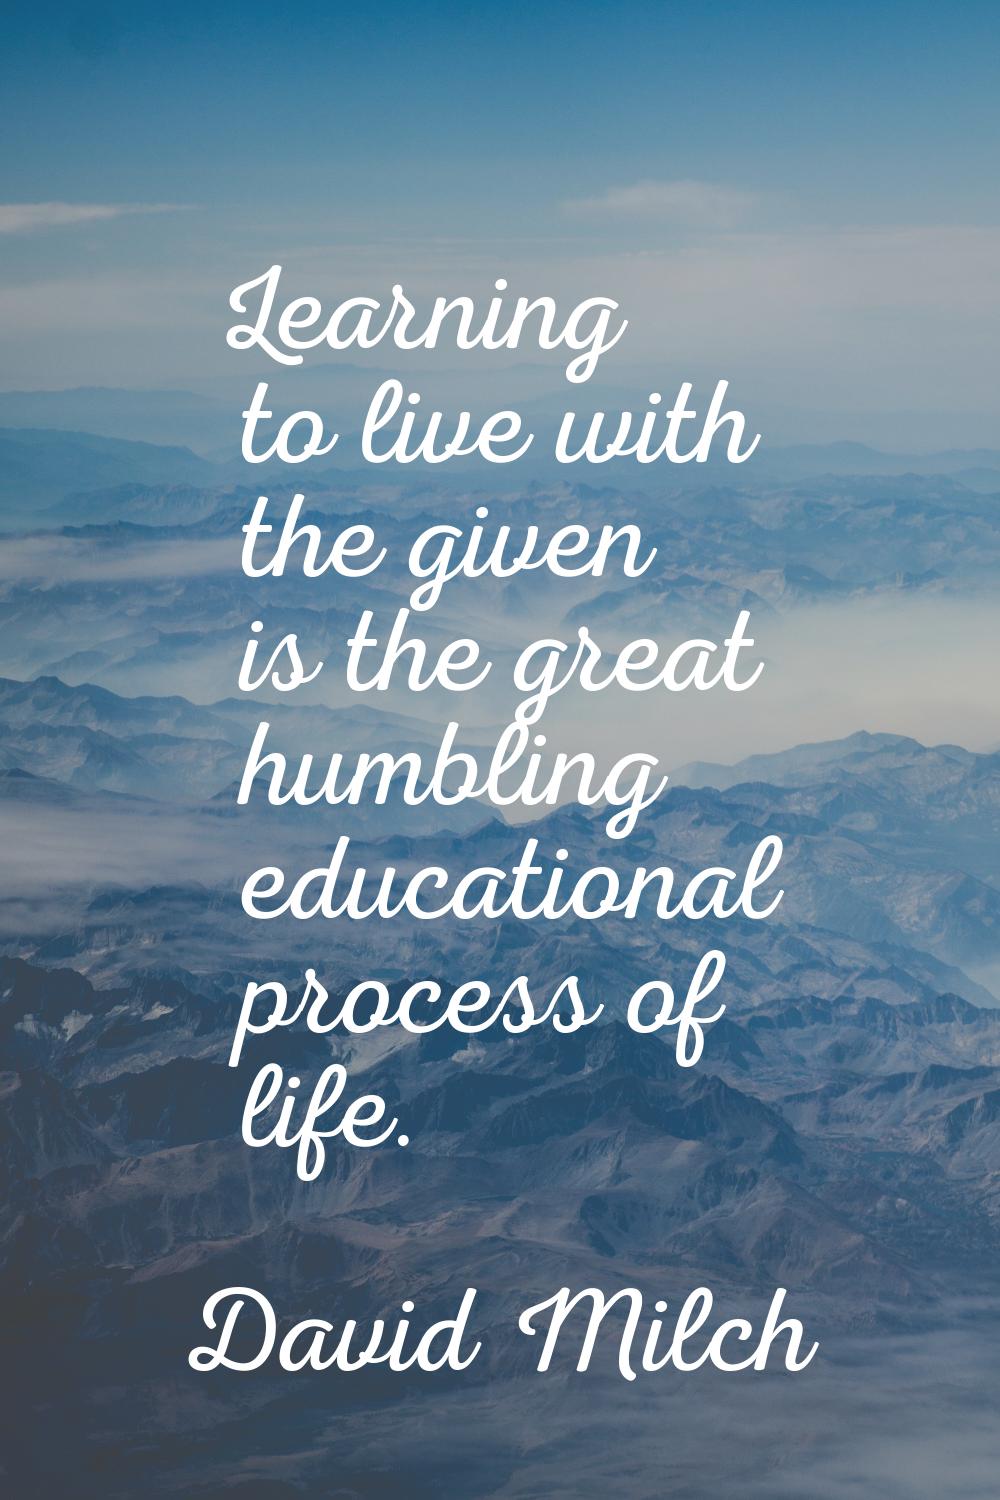 Learning to live with the given is the great humbling educational process of life.